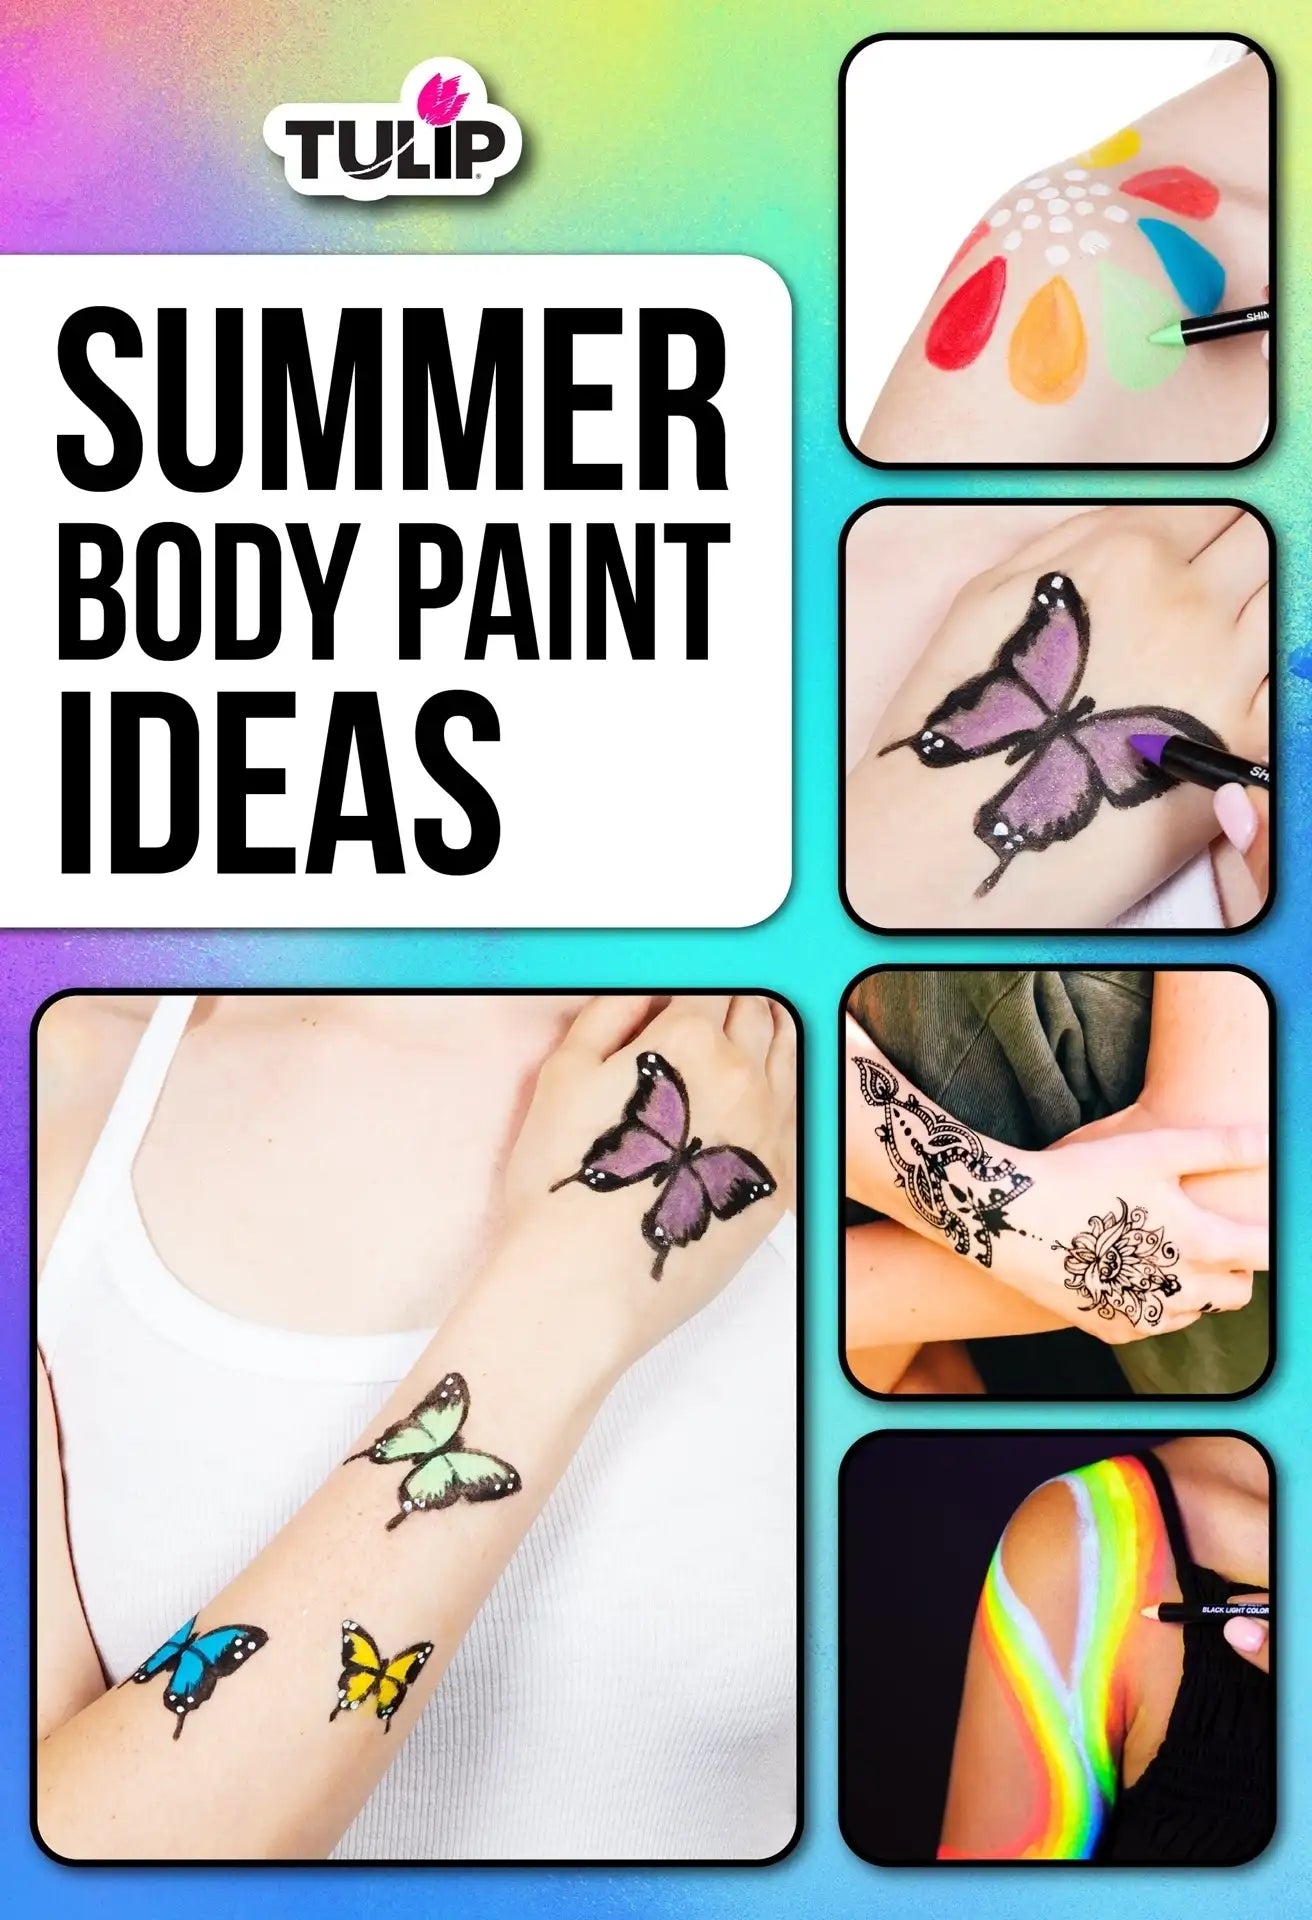 Five Fun Body Paint Ideas for Summer